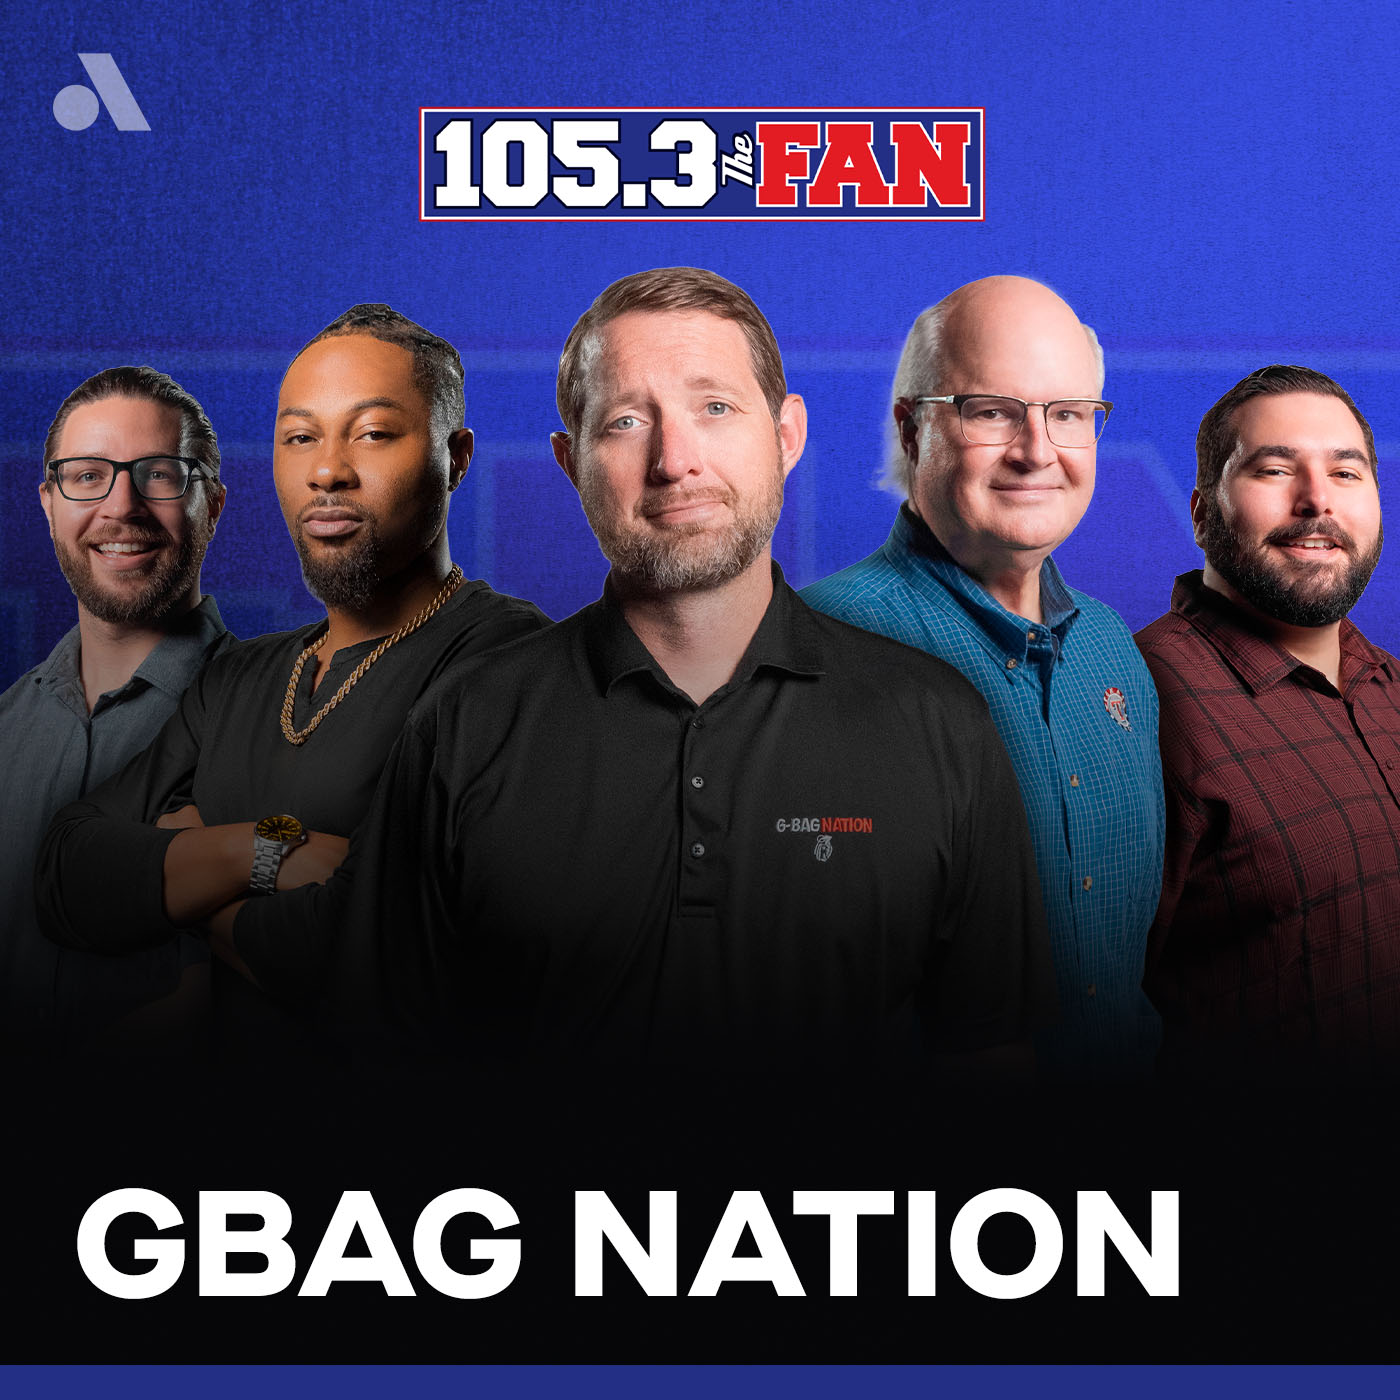 Top Sports Stories at 2pm; Do you believe the Mavs will force a Game 6; Chuck Wagon; GBAG of the DAY; Crusty's Corner: How to deal with fans on the field